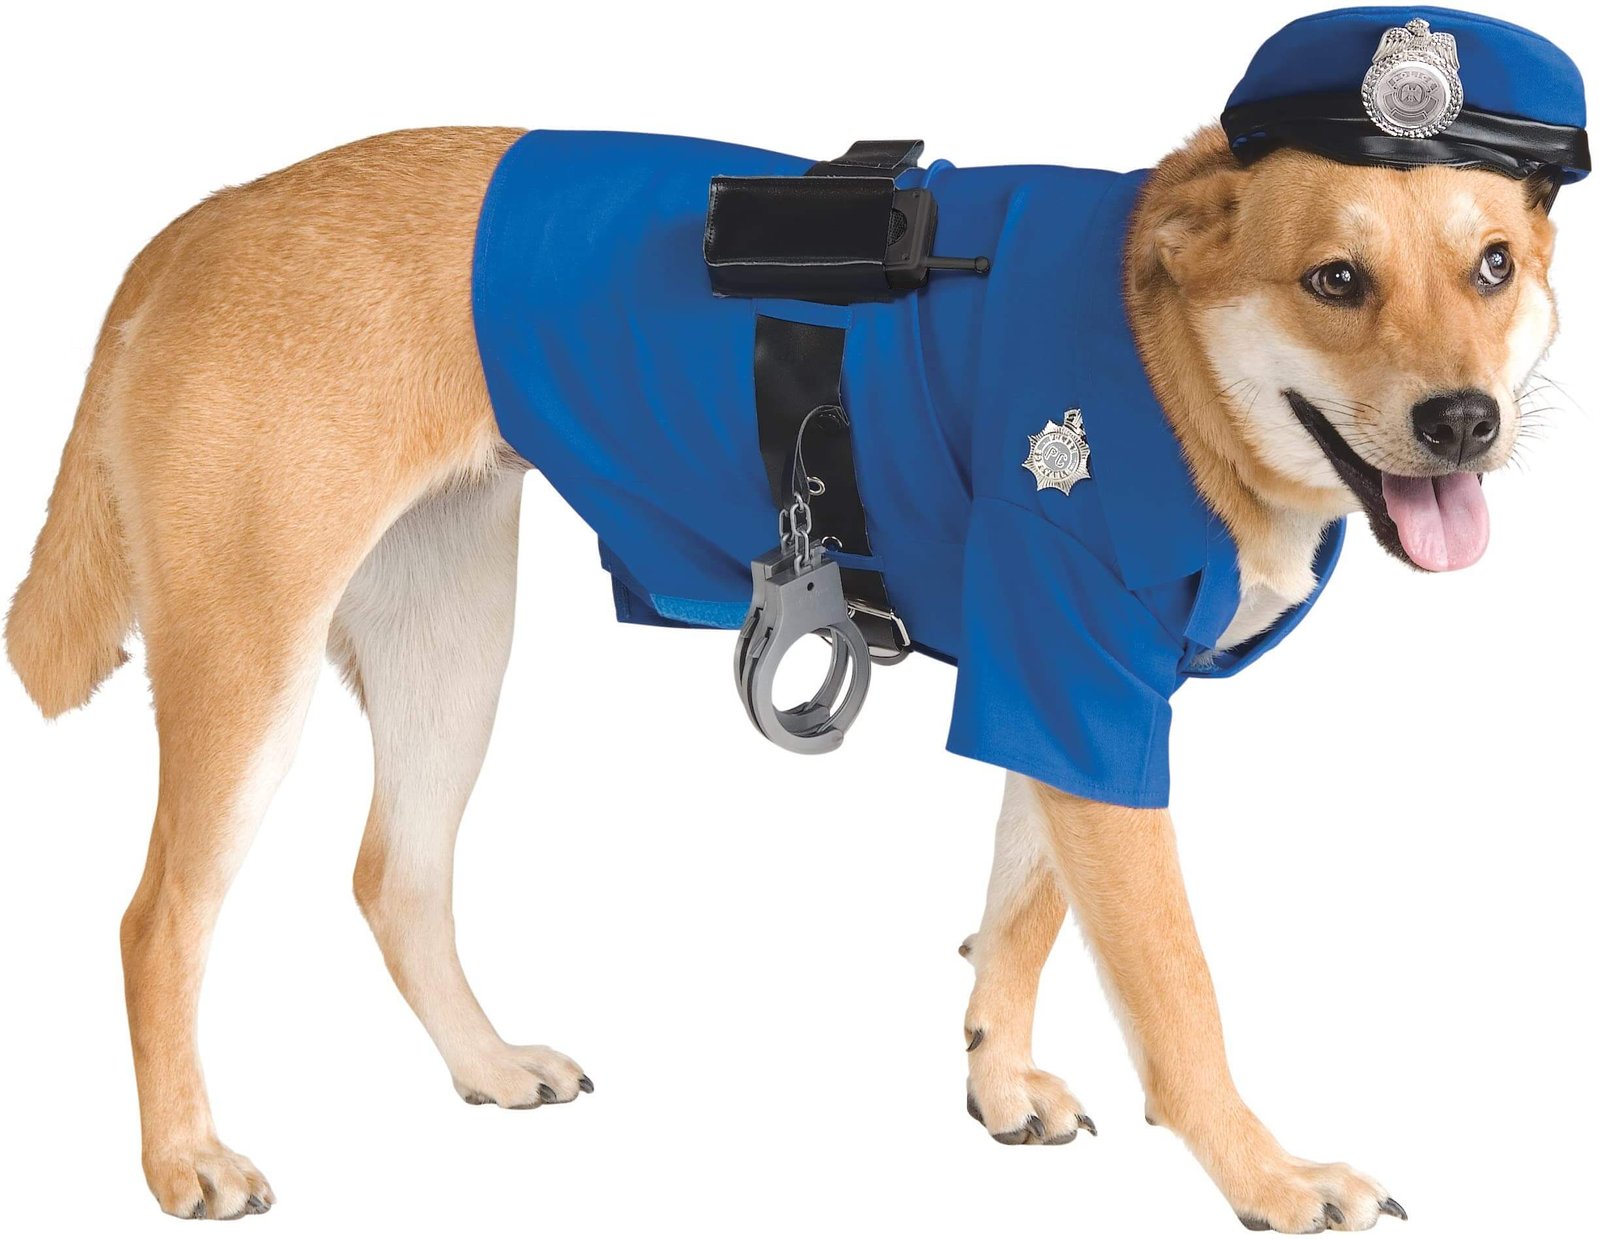 Police Officer and K-9 Unit costume for dog